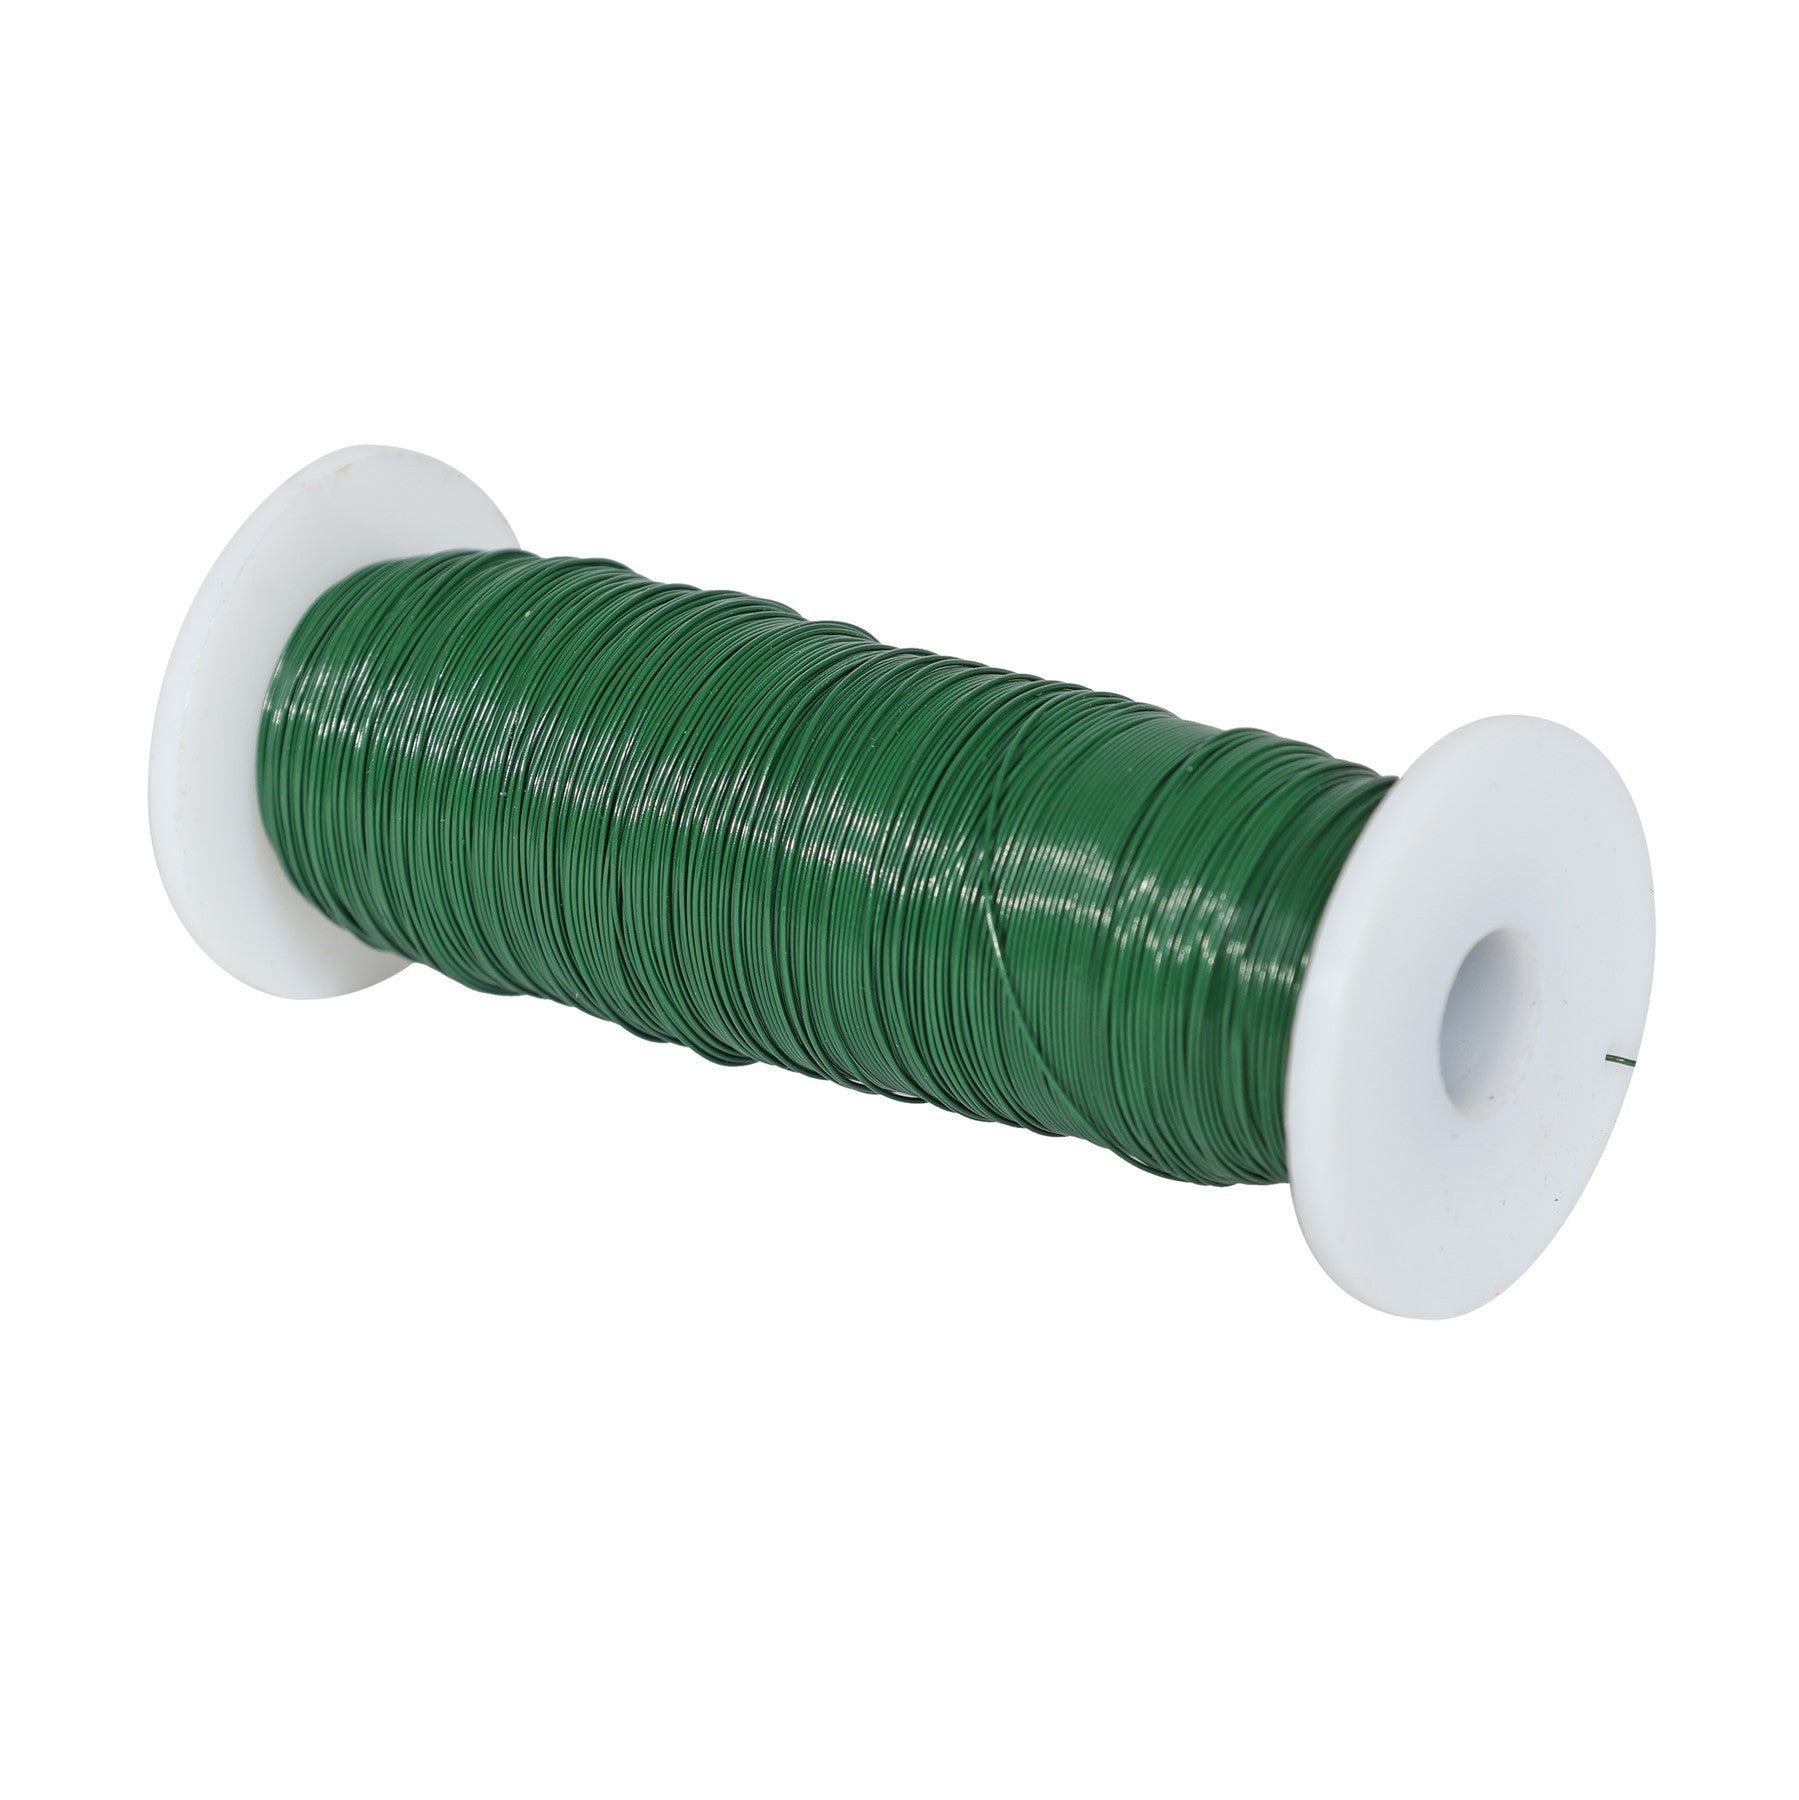 View Green Wire 30g Reel 10 Reels information